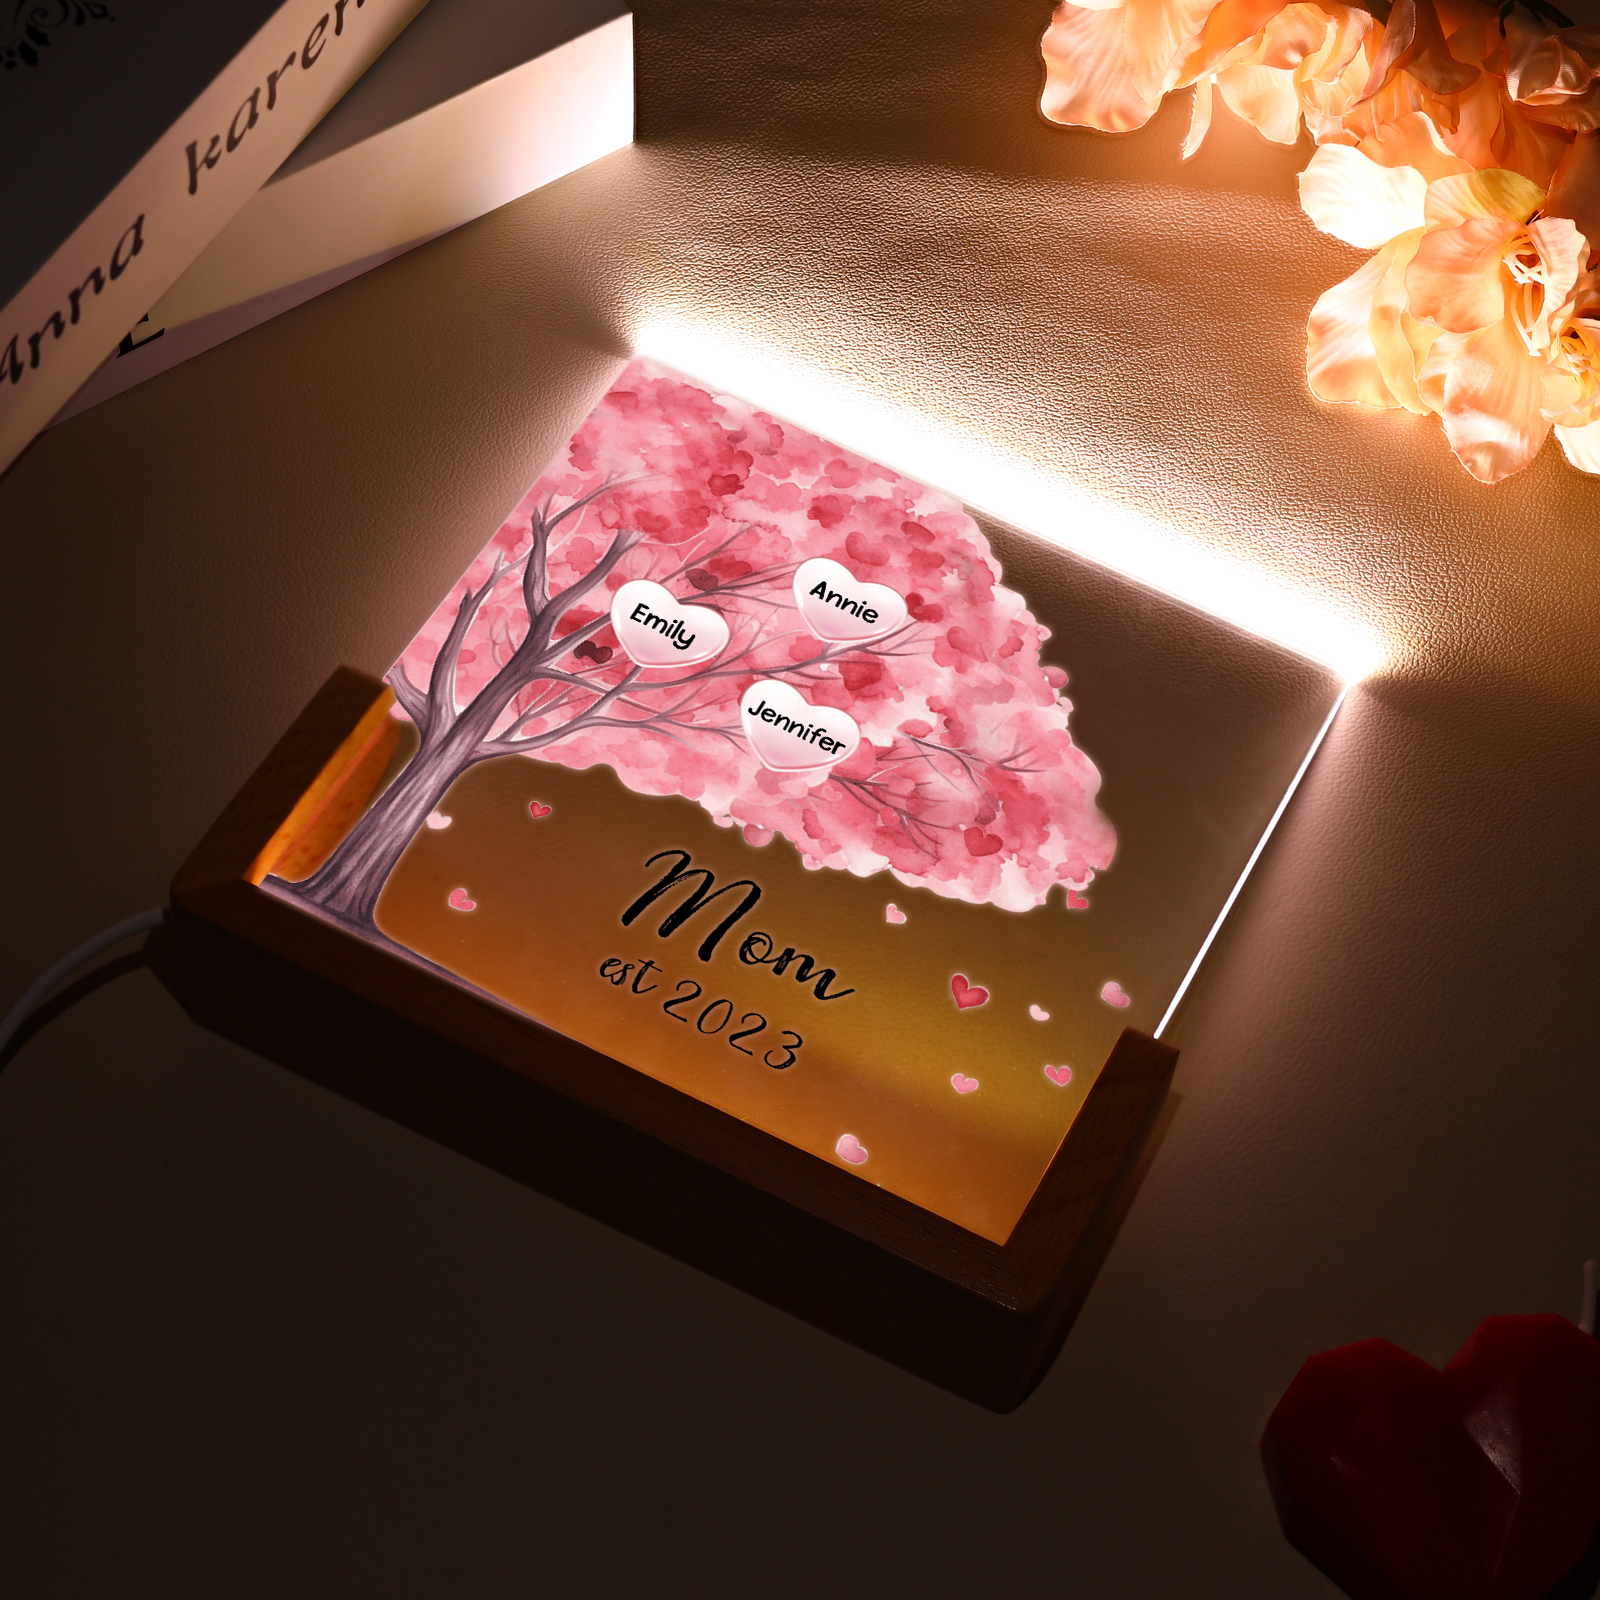 3 Names - Personalized Sakura Tree Night Light with Custom Text And Date LED Light, Gift for Mom